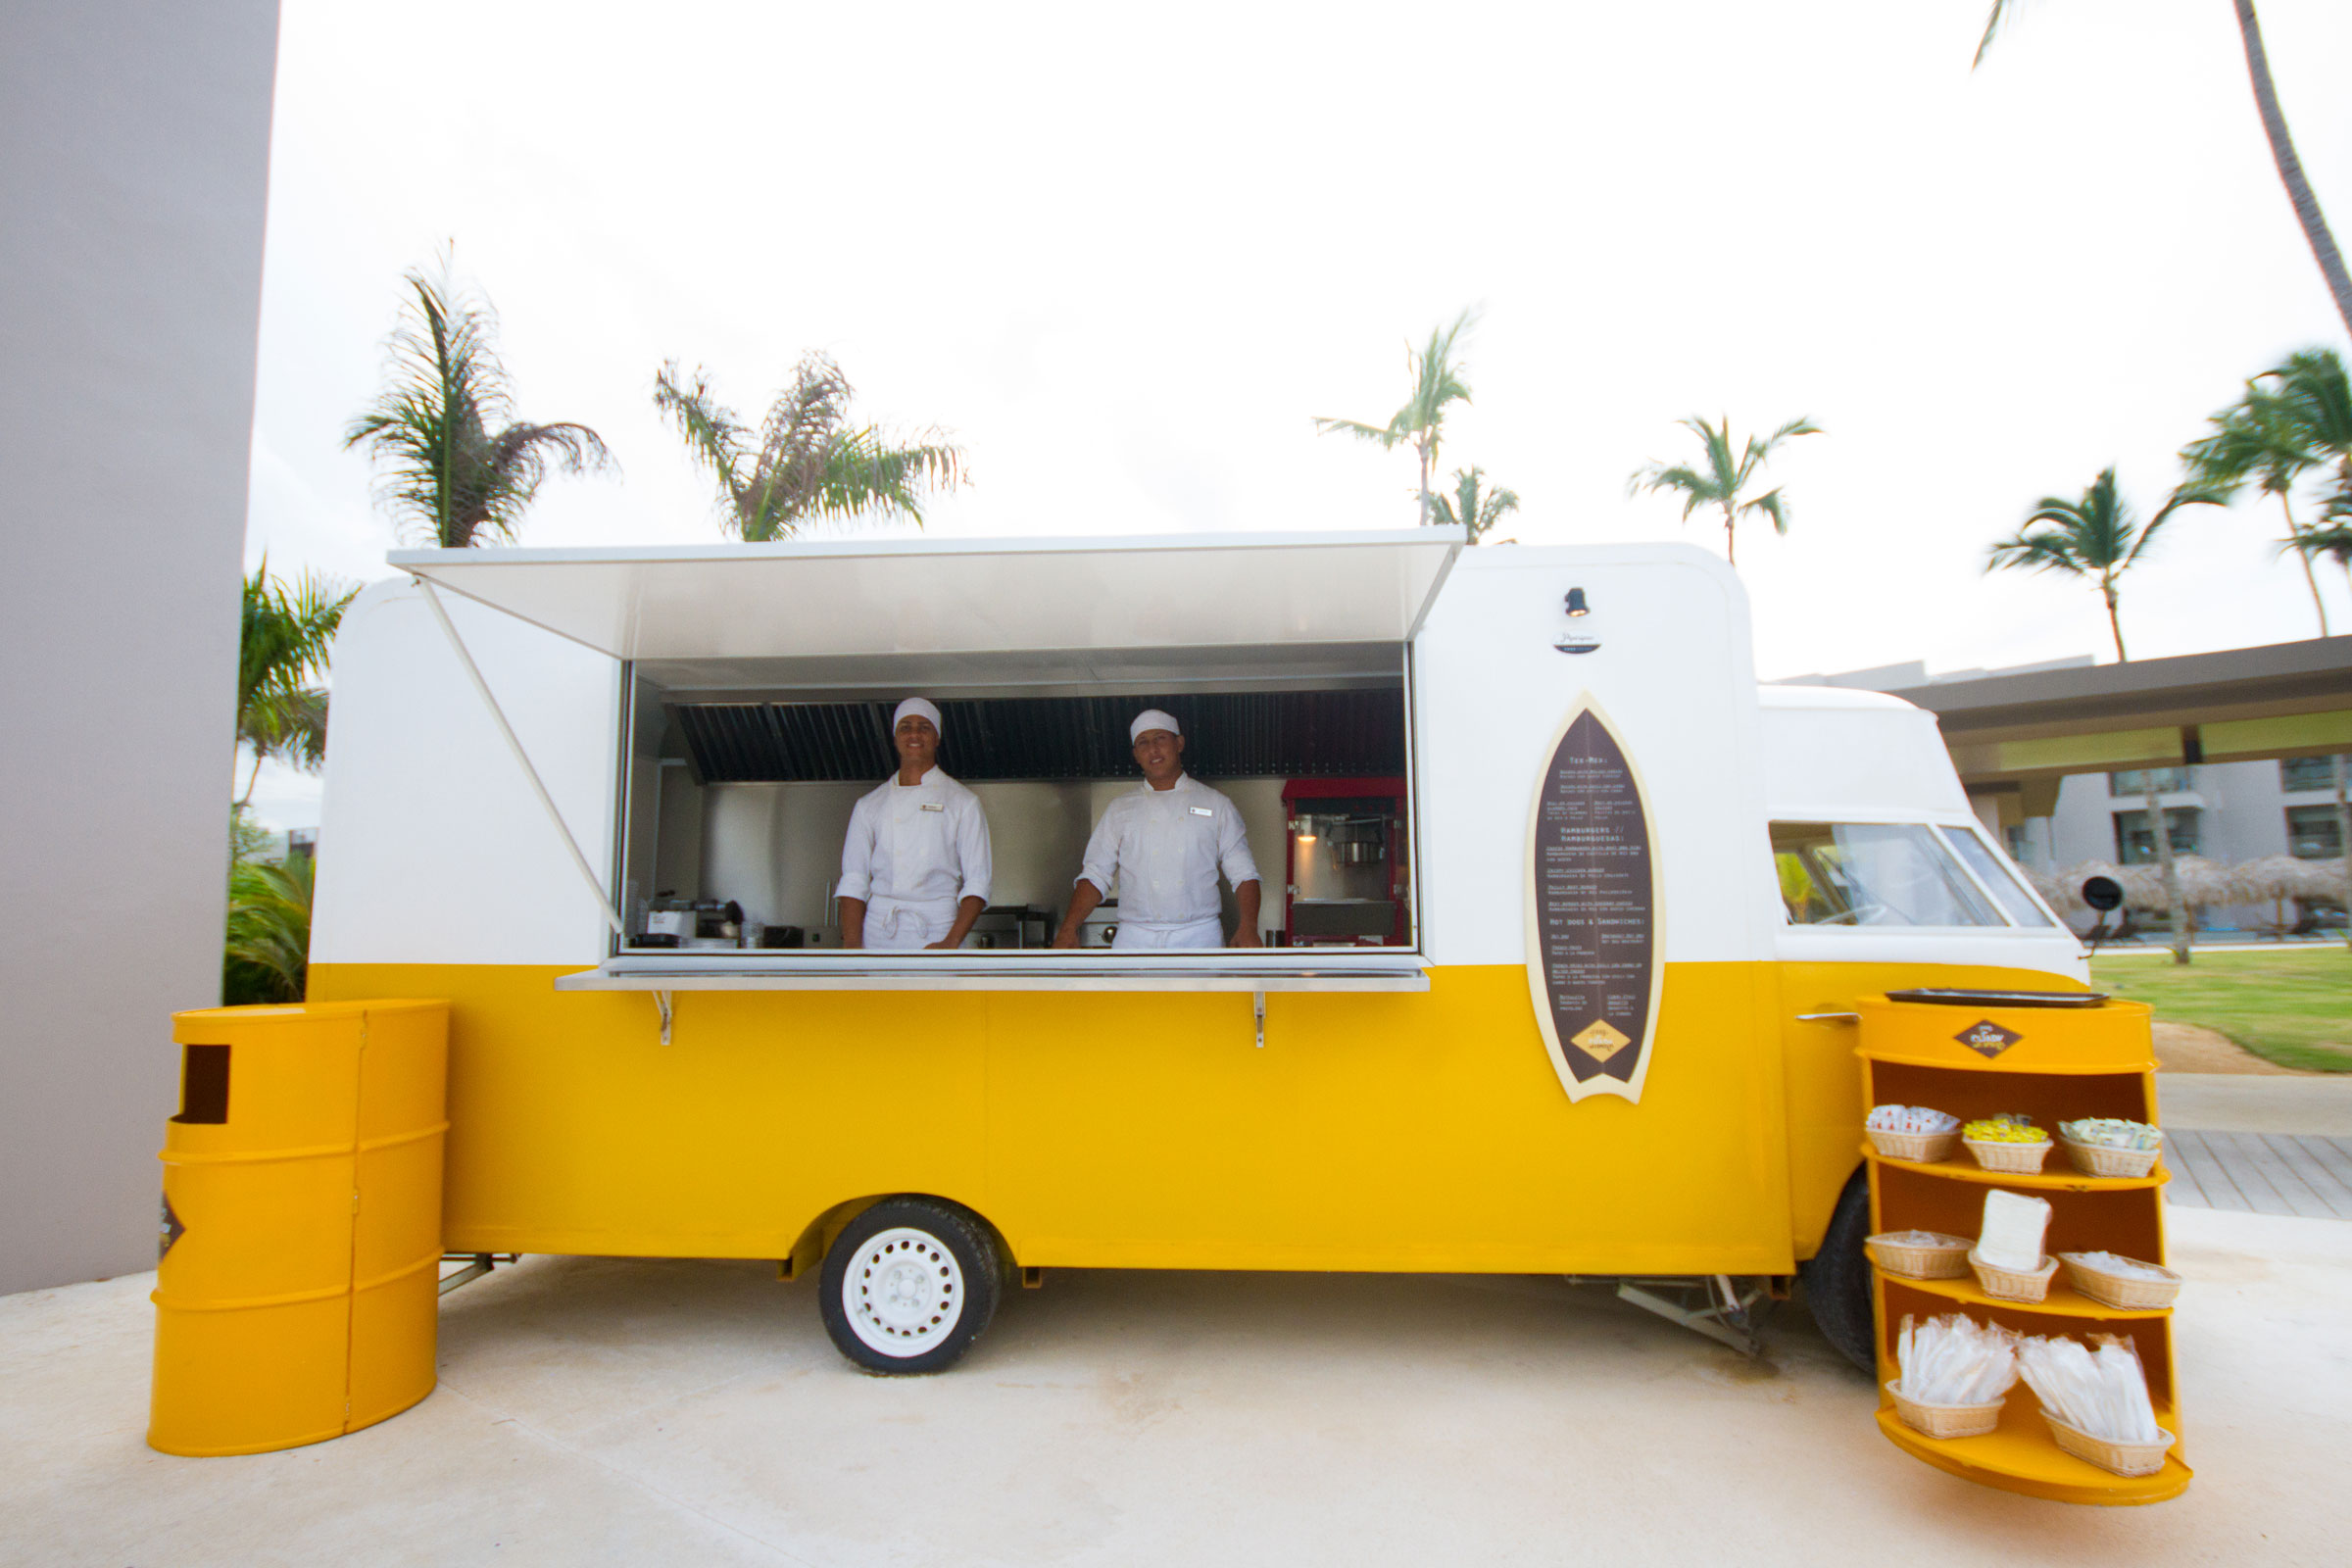 La Cocinita Food Truck at Finest Punta Cana with a variety of delicious takeout meals